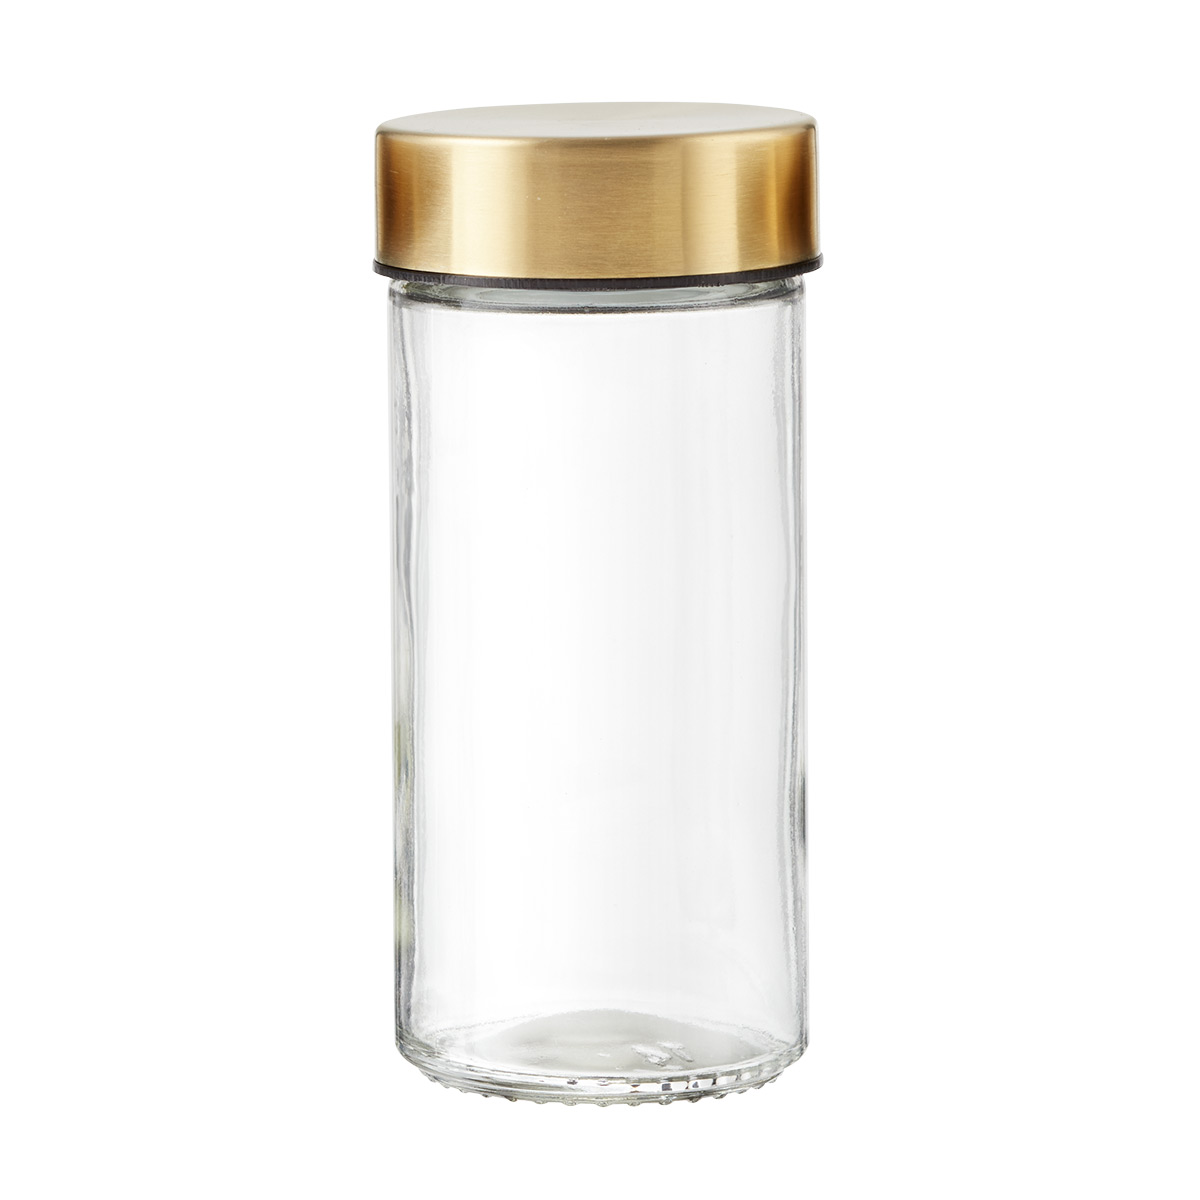 https://www.containerstore.com/catalogimages/479727/10092272-3-ounce-glass-spice-jar-gol.jpg